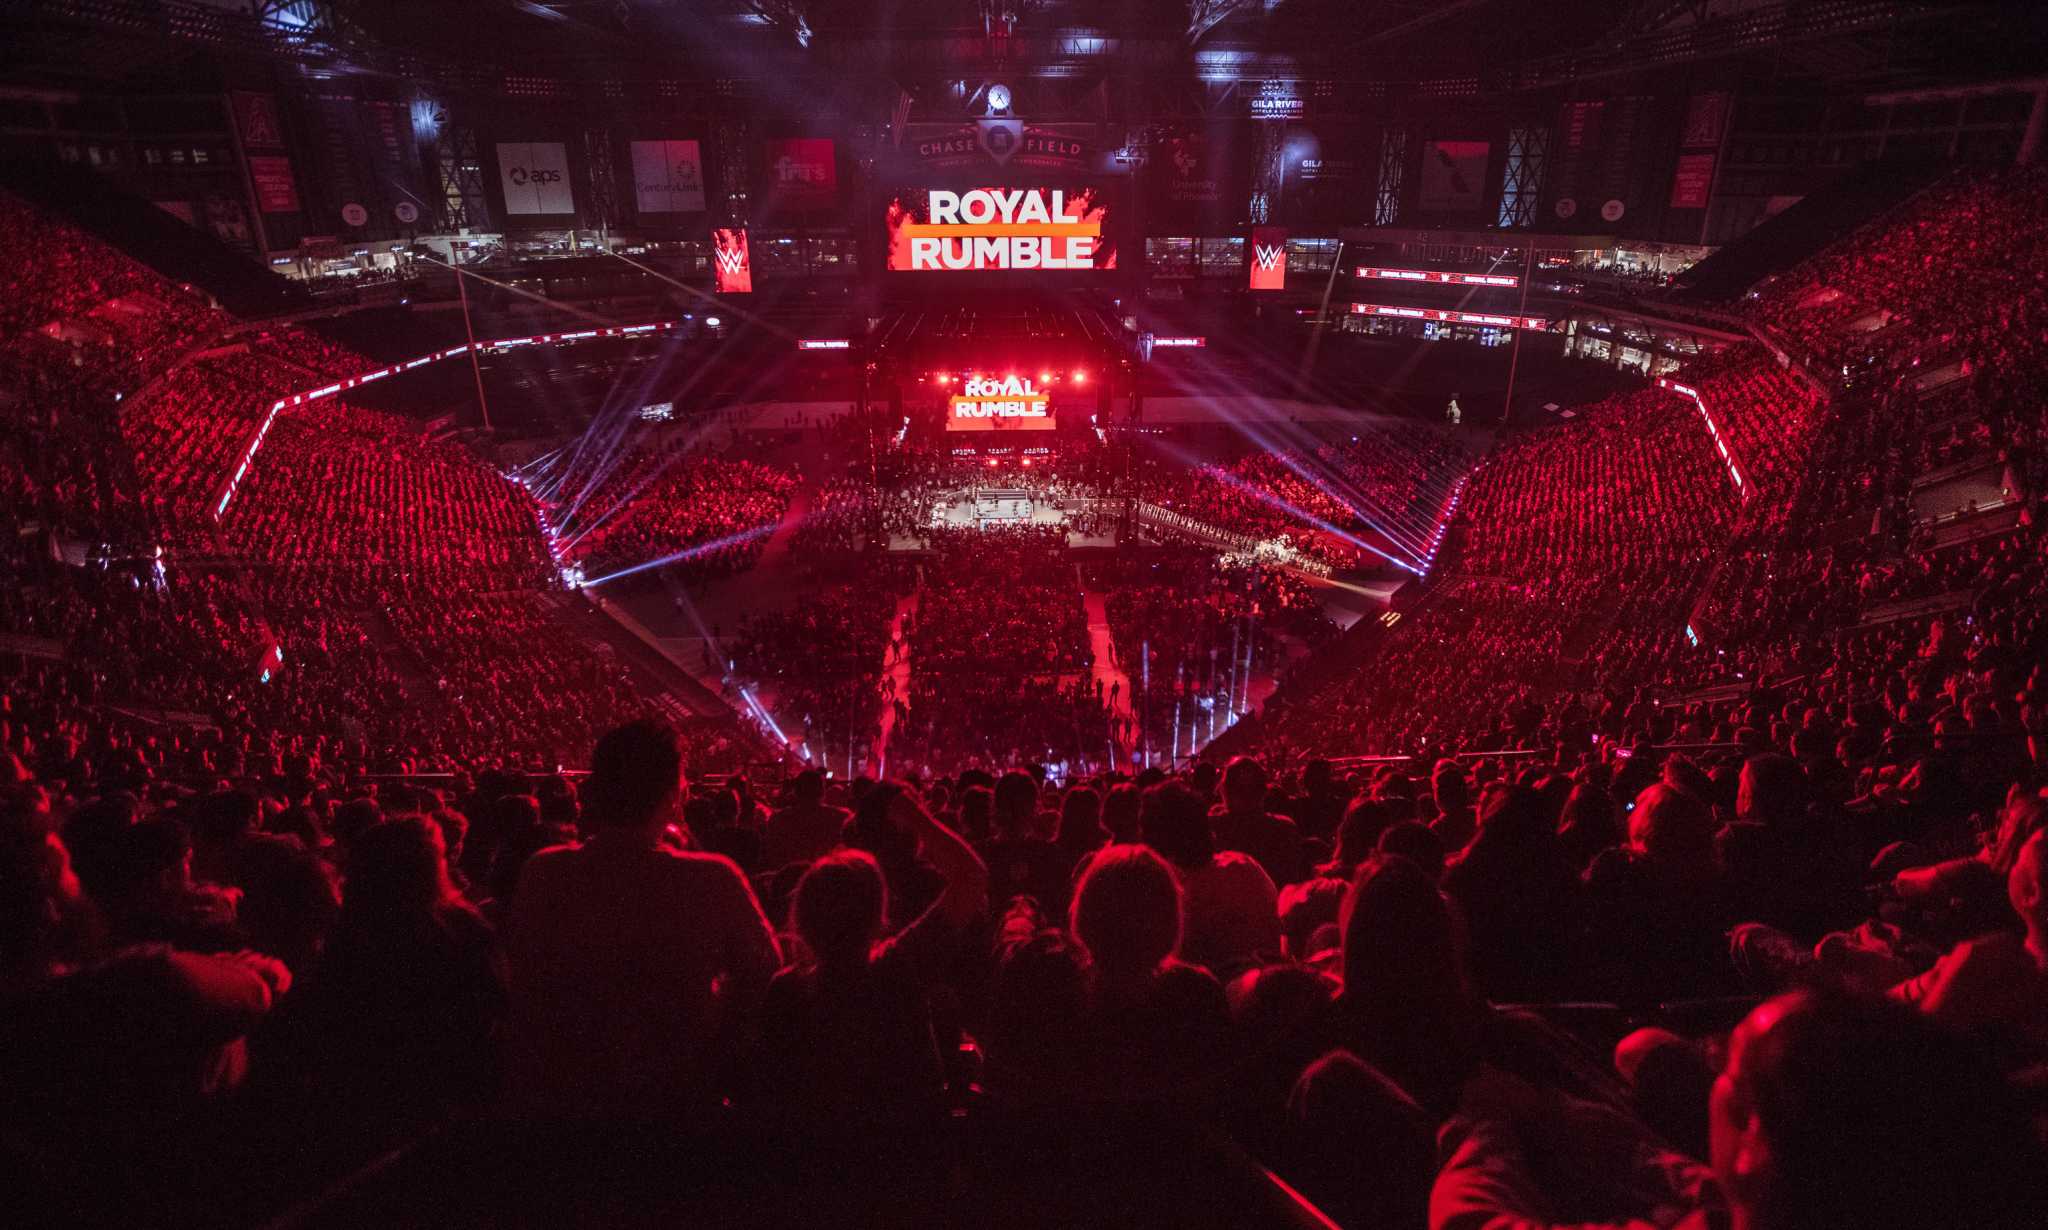 WWE’s Royal Rumble coming to Minute Maid Park in 2020